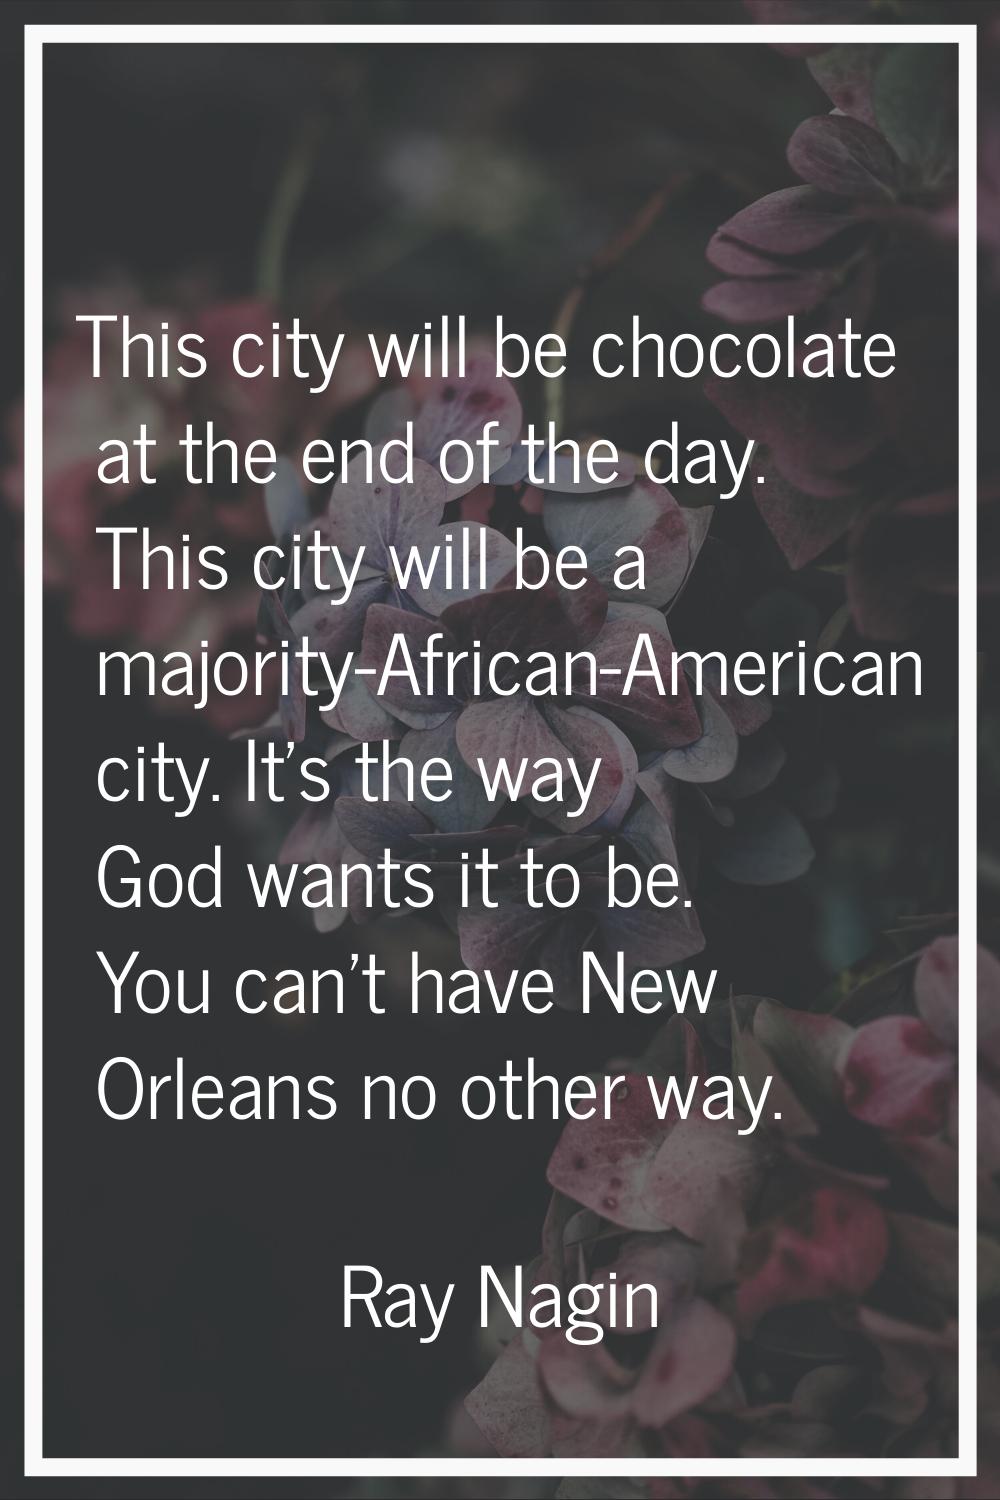 This city will be chocolate at the end of the day. This city will be a majority-African-American ci